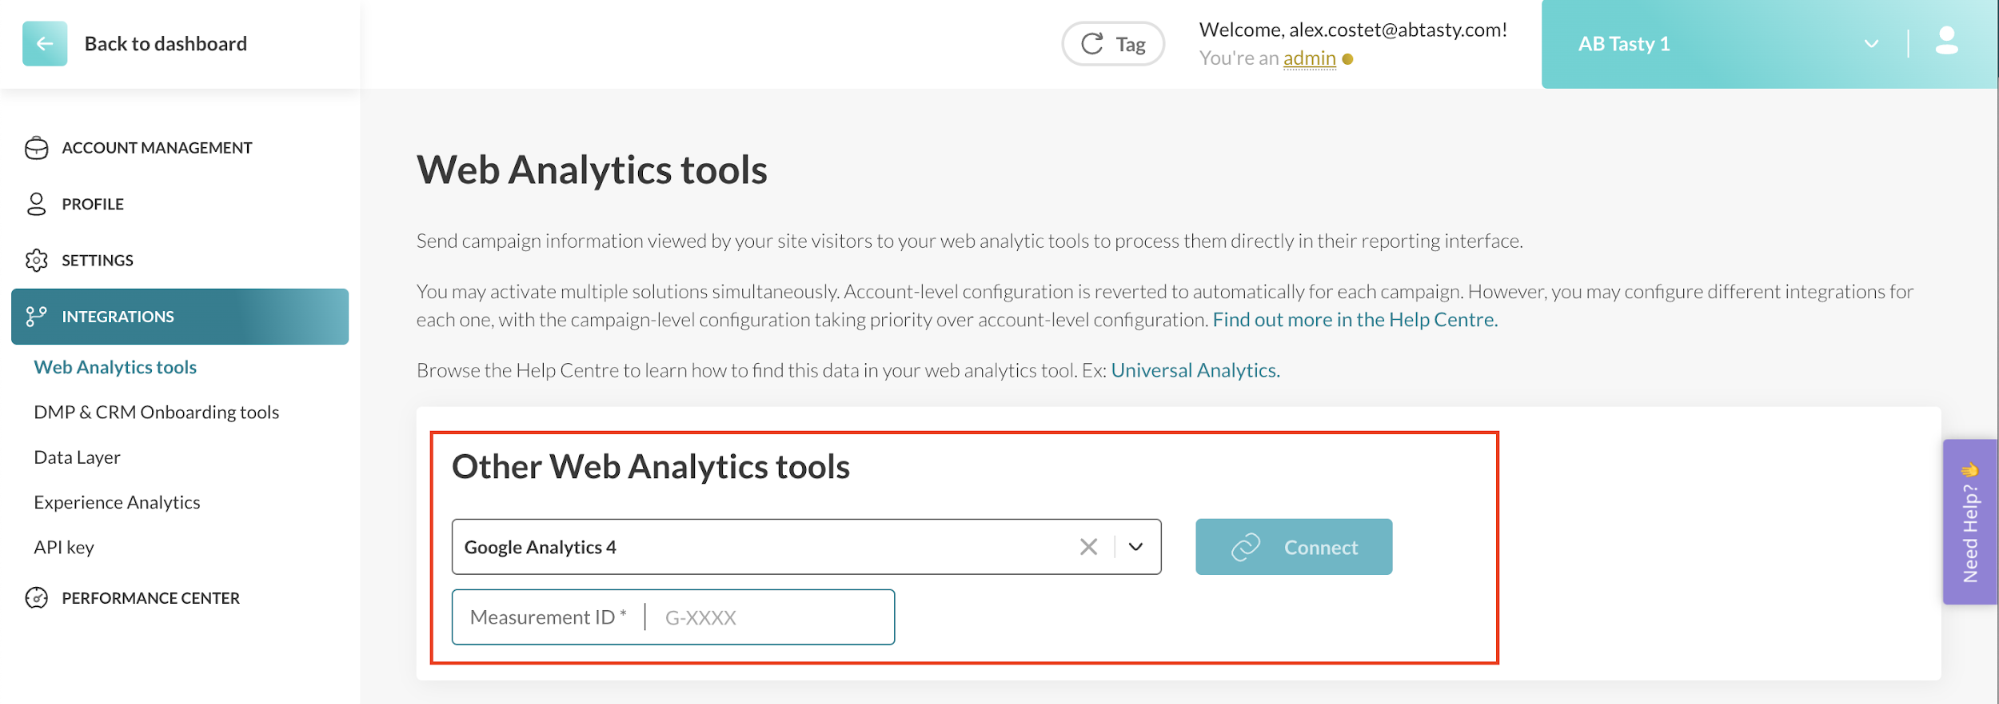 Integration_Guide_Analytics_Tools_17__1_.png